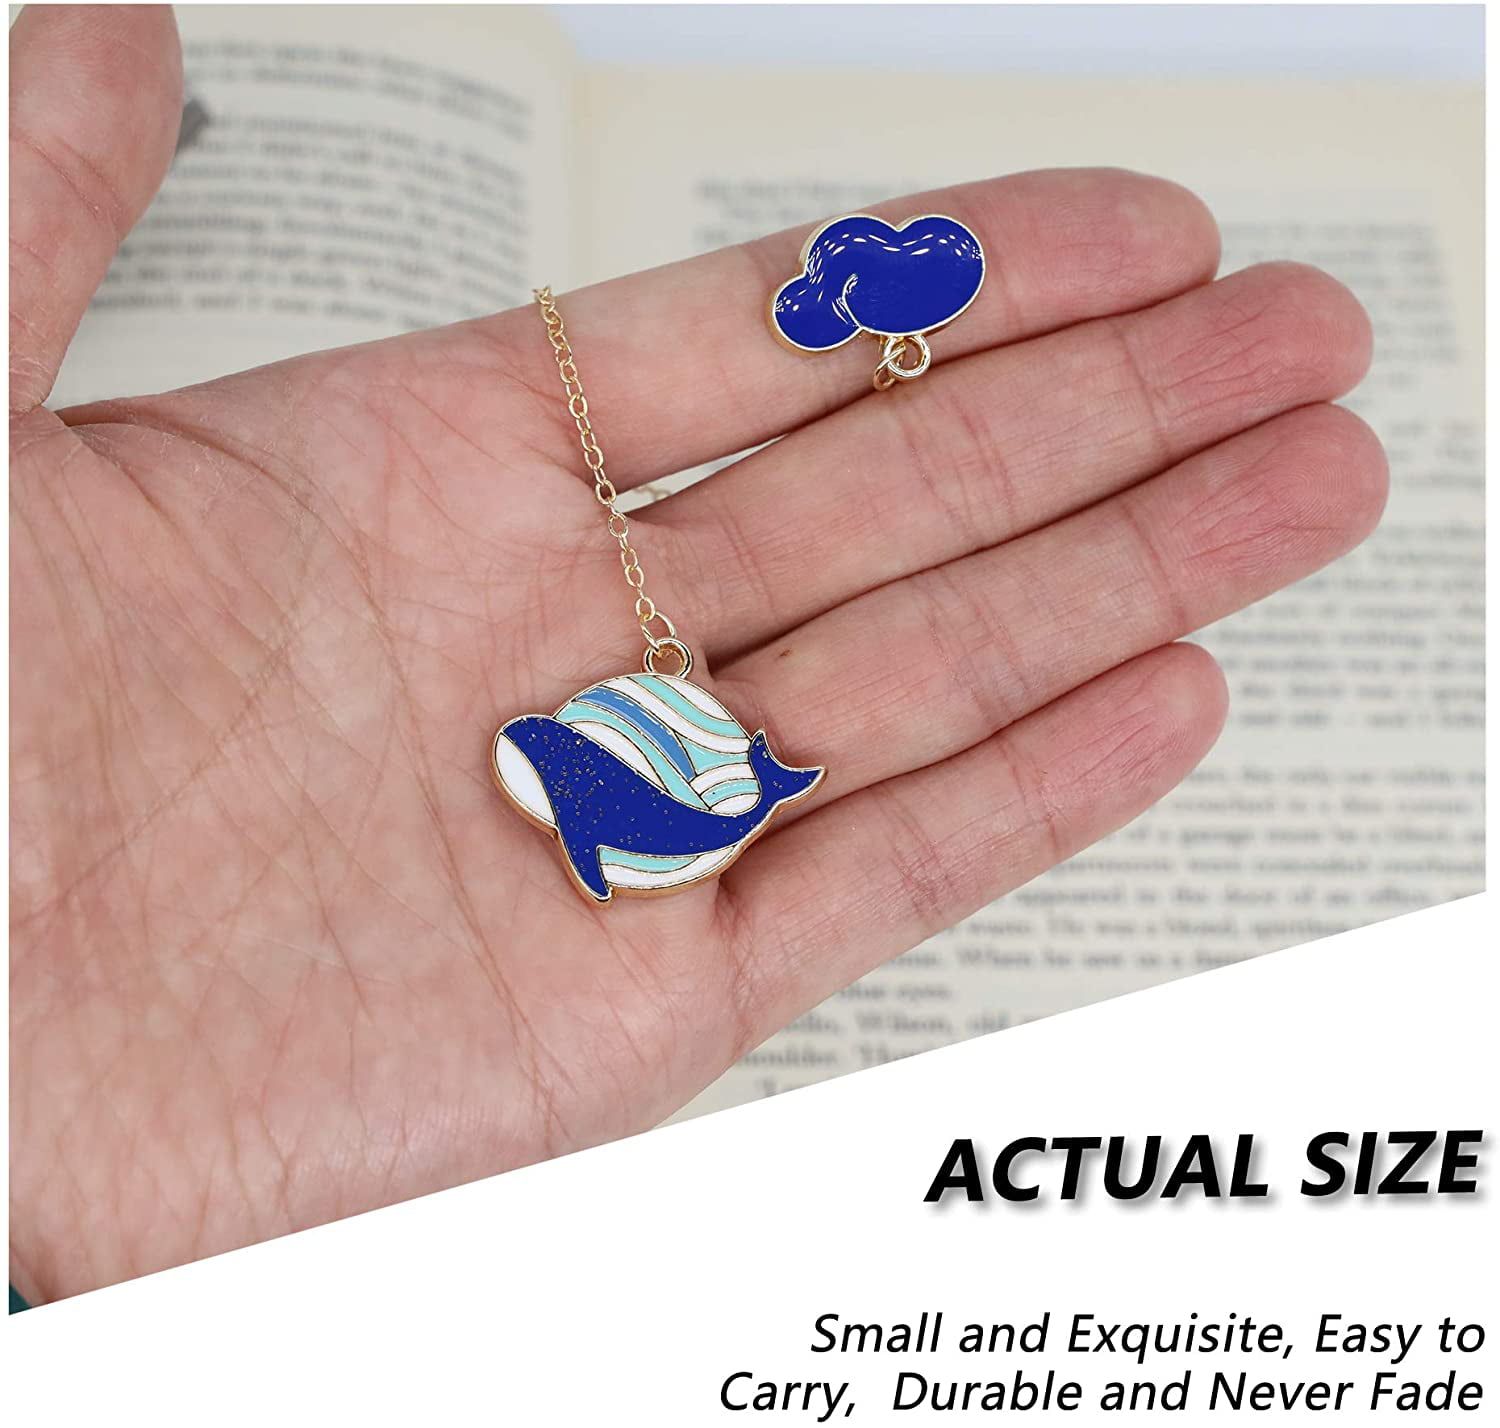 Exquisite Book Marker Will Help You Read Suitable Gift for Kid,Girl,Student. Blue Whale Metal Bookmark 4 pcs Bring Every Reader The Pleasure of Traveling The Page Unique Design Book Stopper 